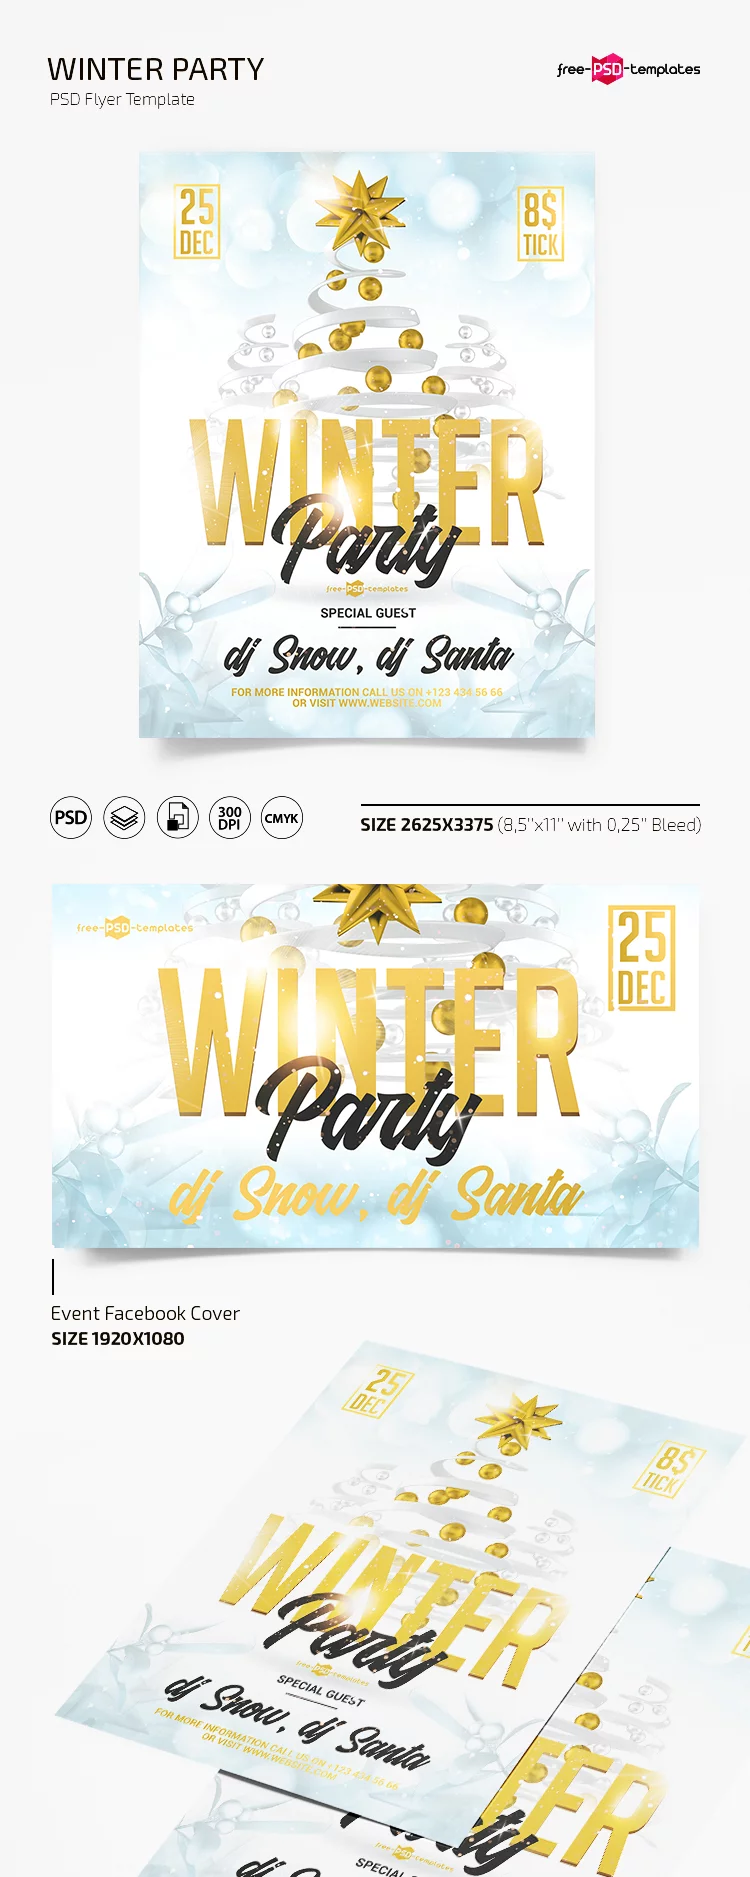 Free Winter Party Flyer Template in PSD